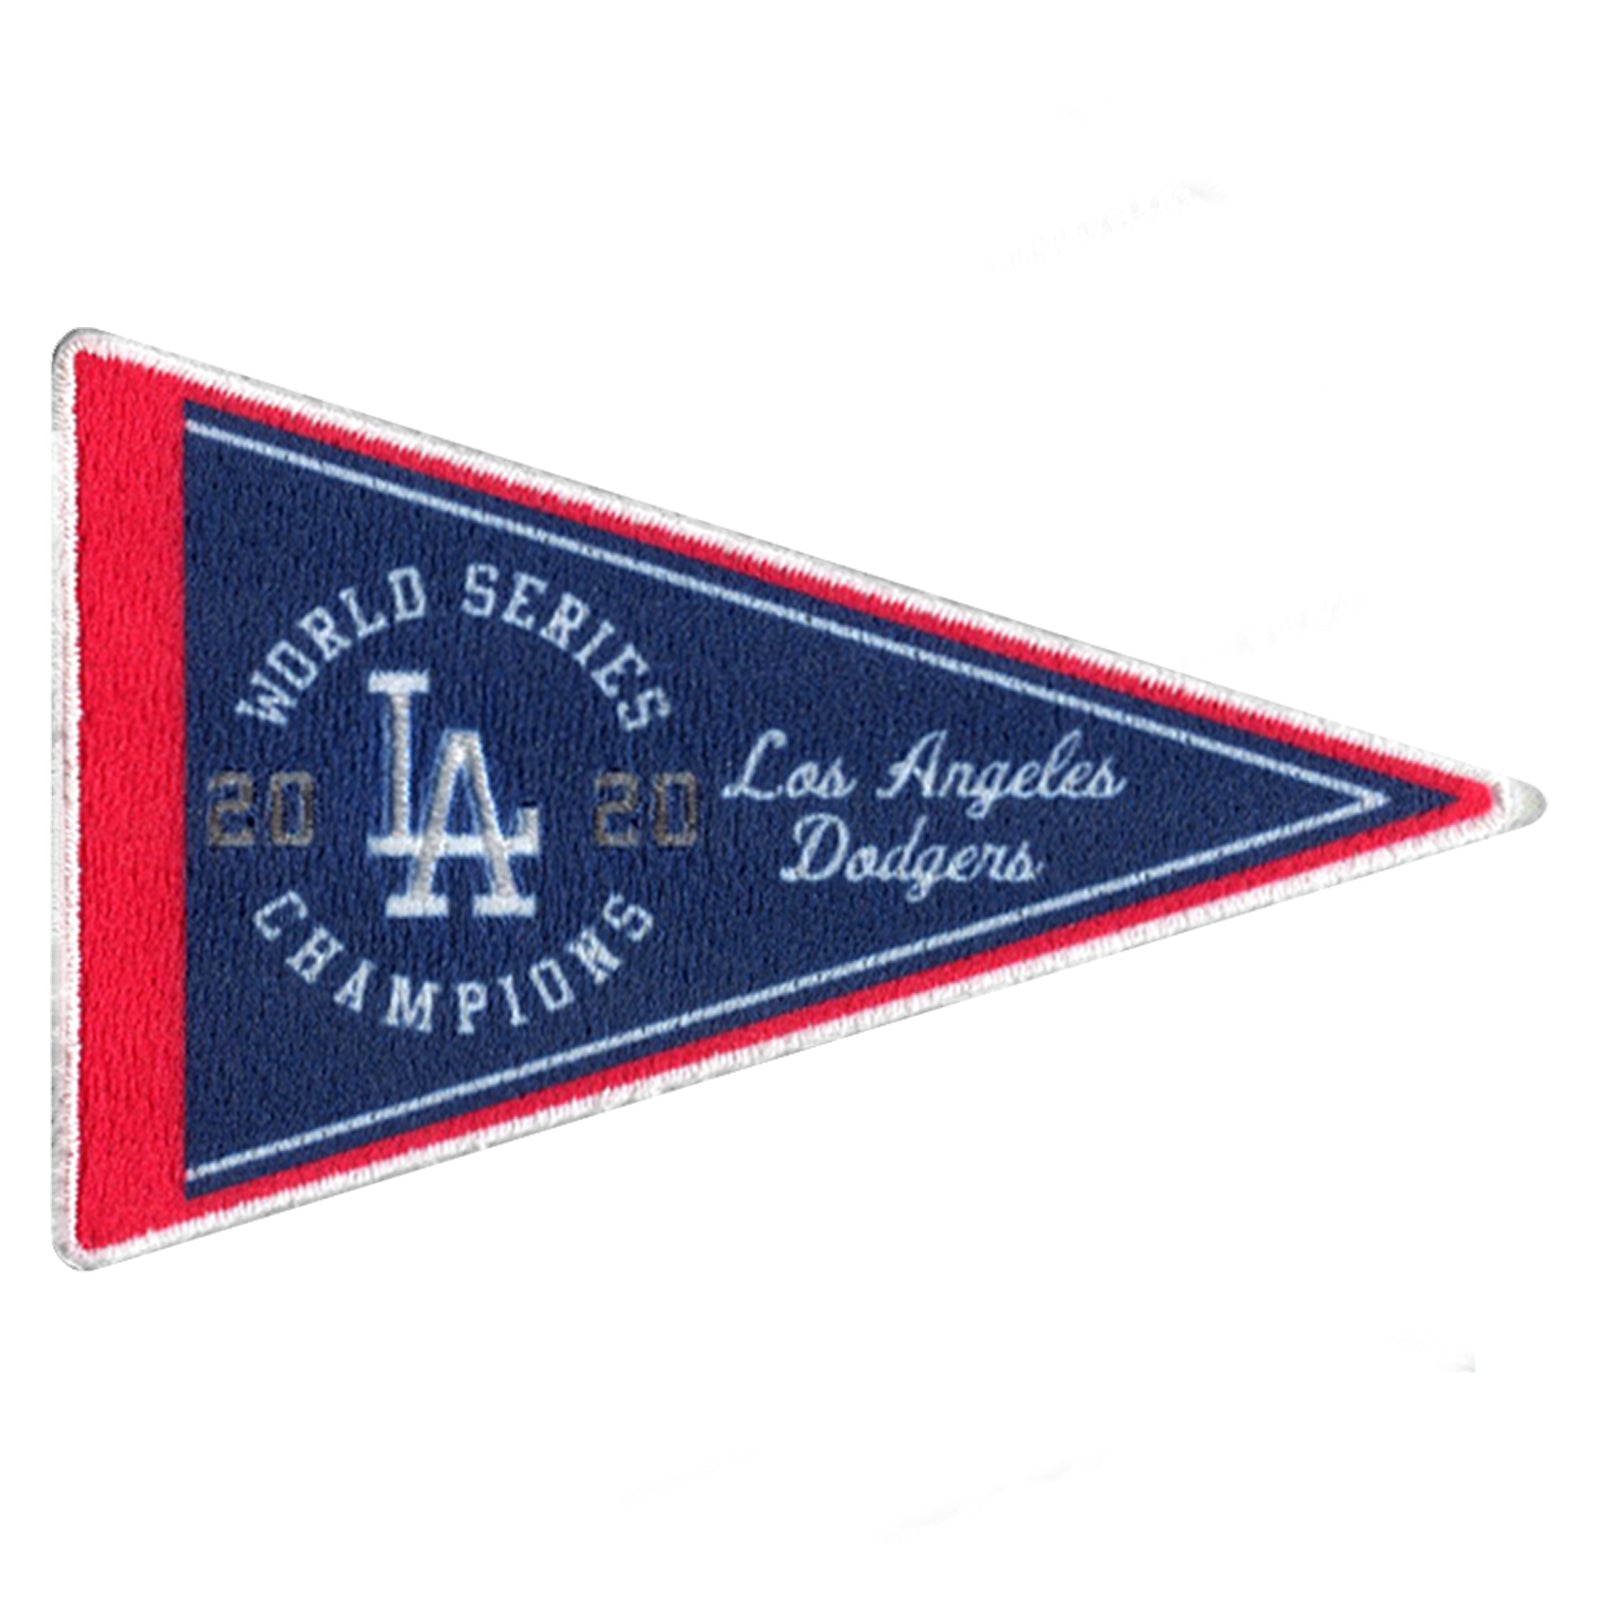 2020 MLB World Series Champions Los Angeles Dodgers Pennant Patch 